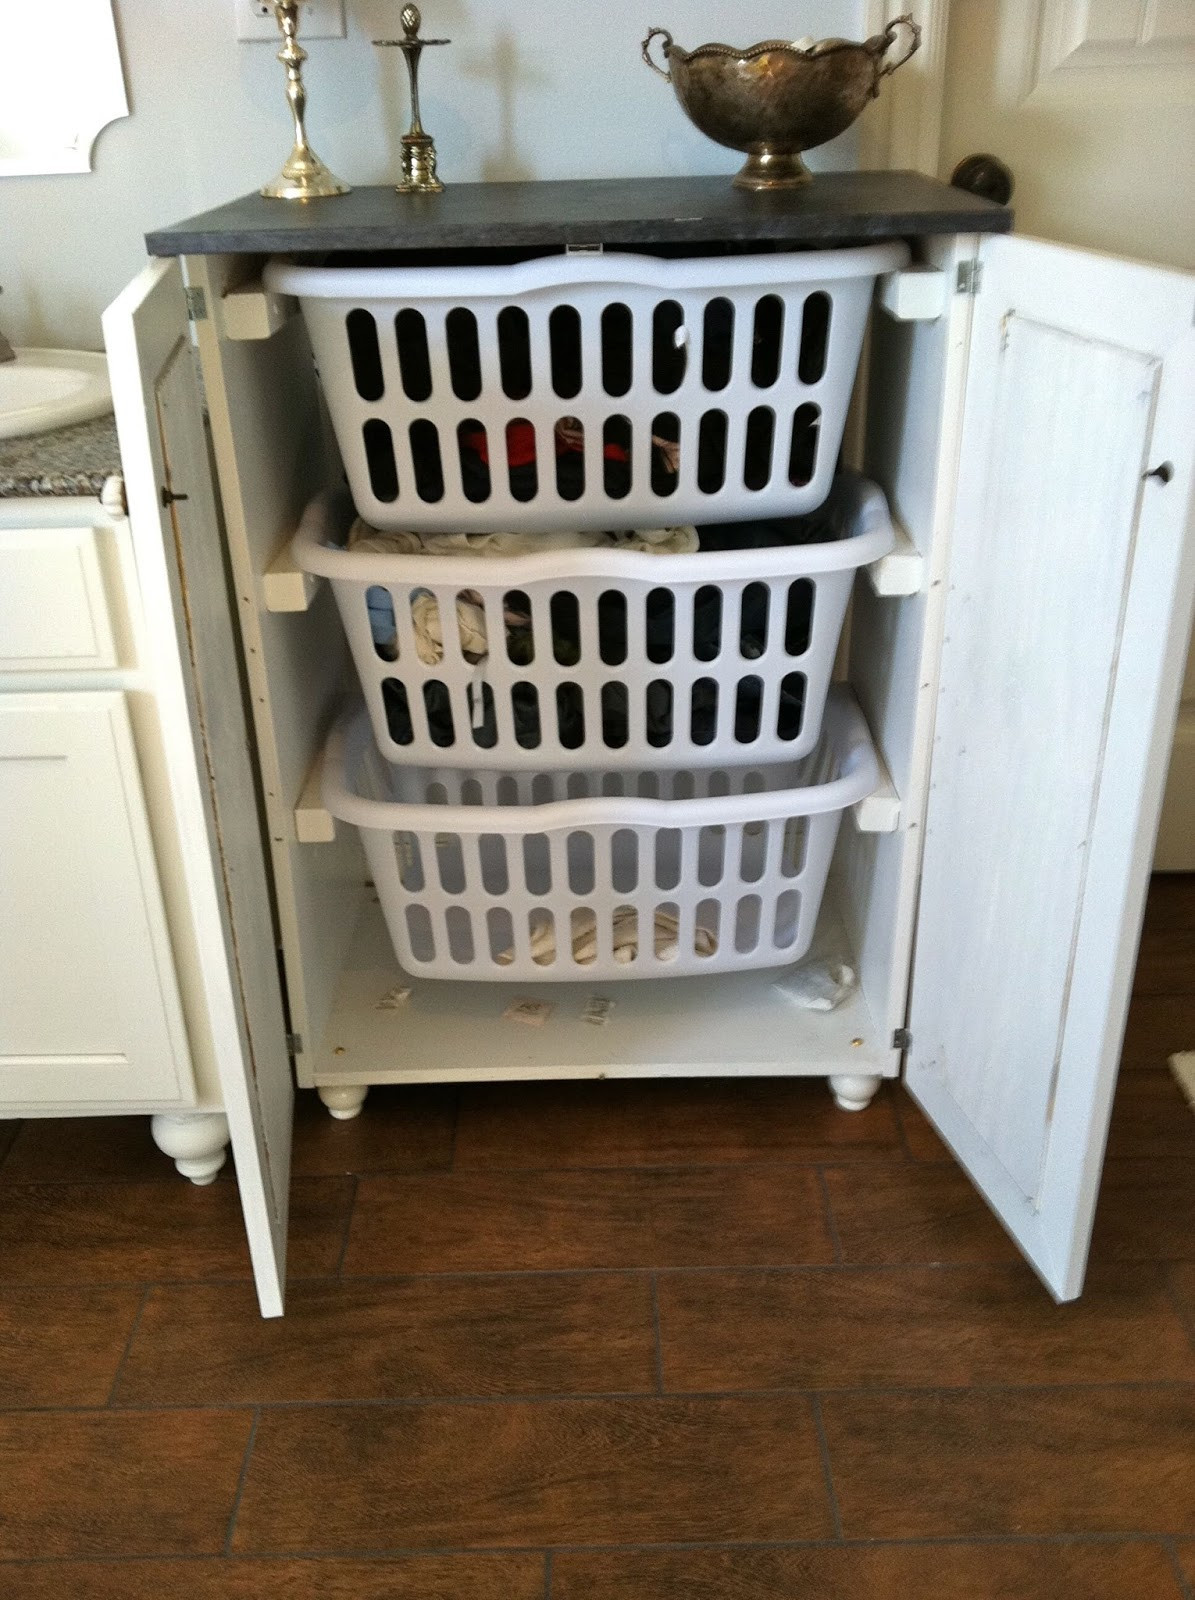 Laundry Basket Organizer DIY
 7 DIY Projects for Renters Tips